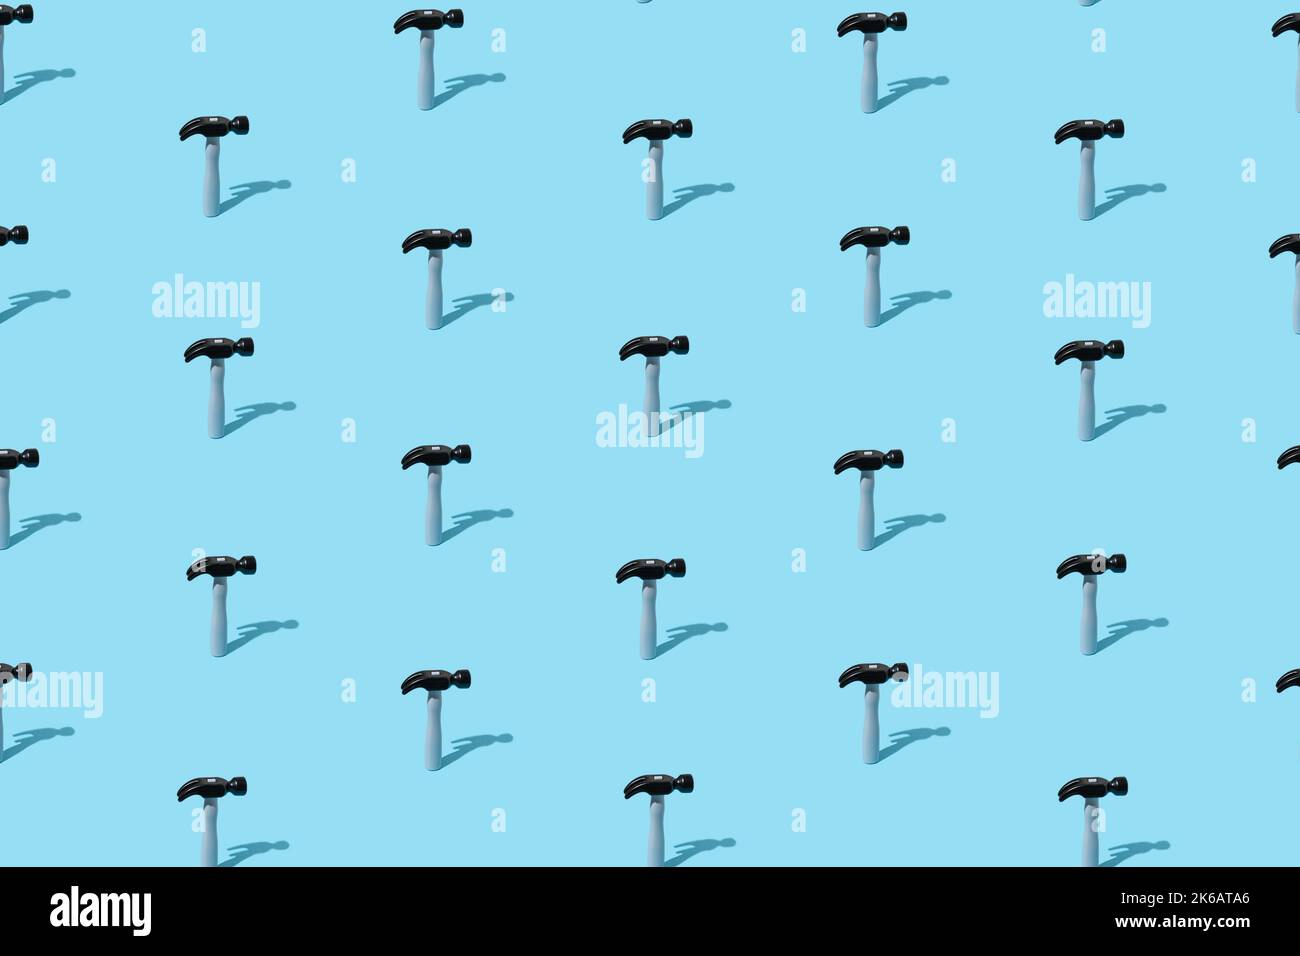 A lot of hammers as isometric grid pattern on a blue pastel background. Minimal art concept. Stock Photo